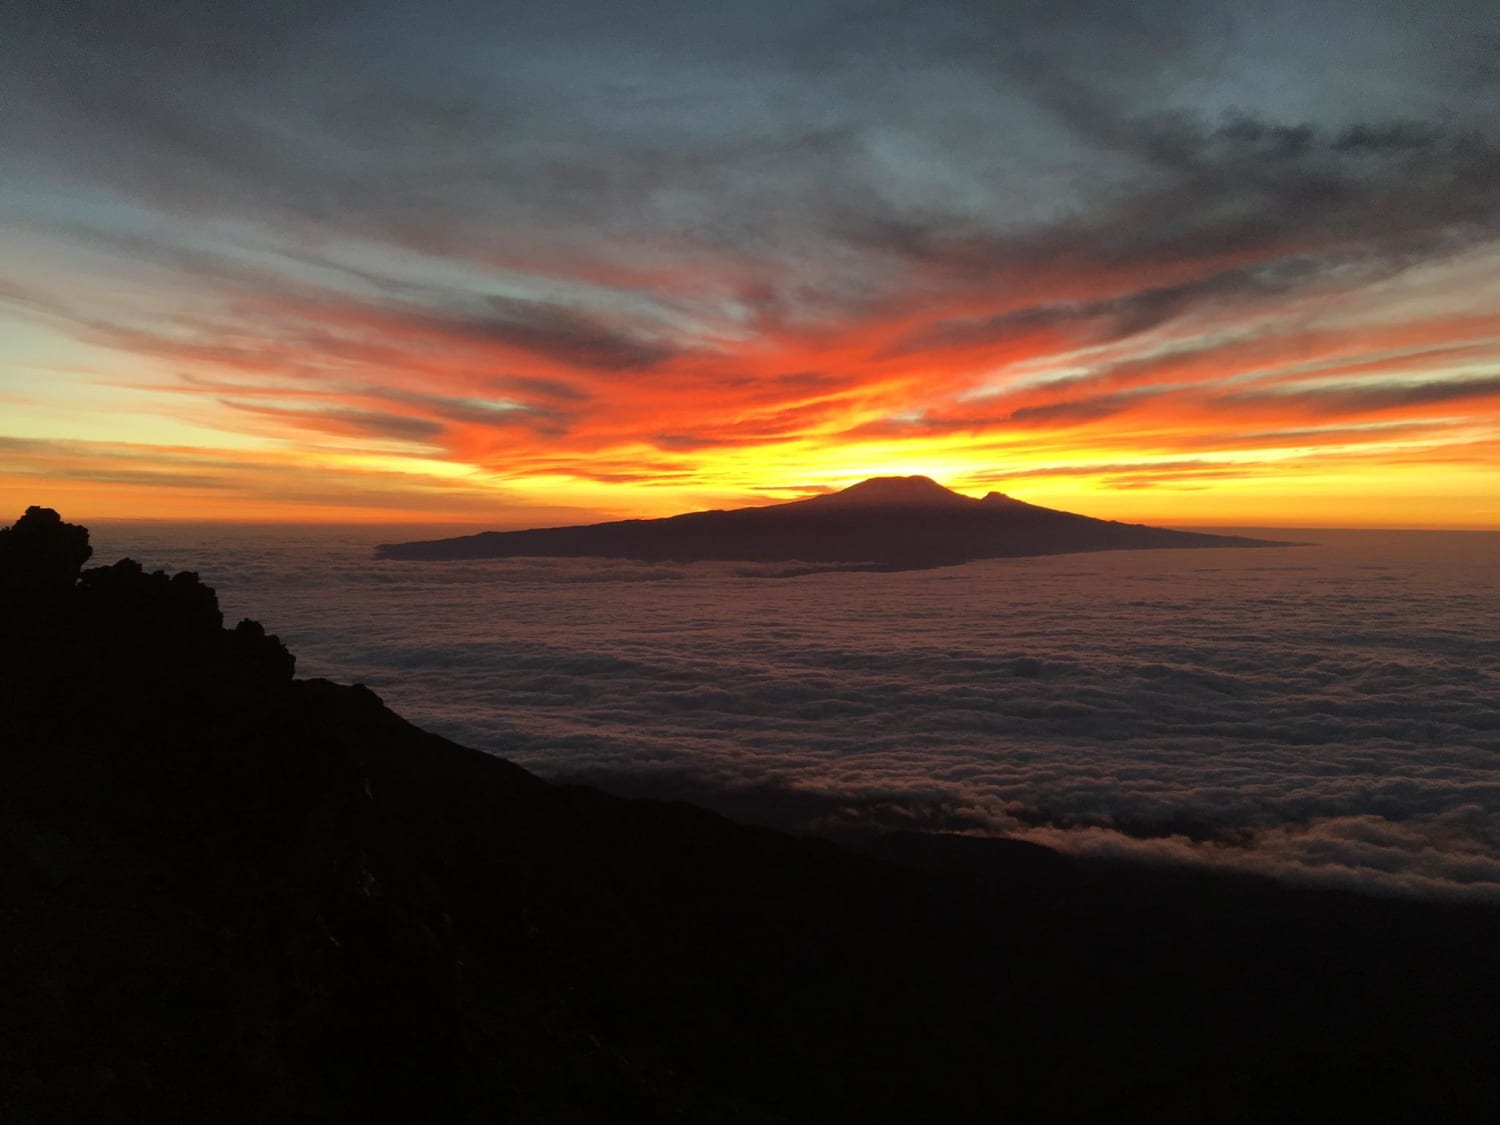 Tanzanian Sunrise looking at Kilimanjaro from Mt Meru over the clouds